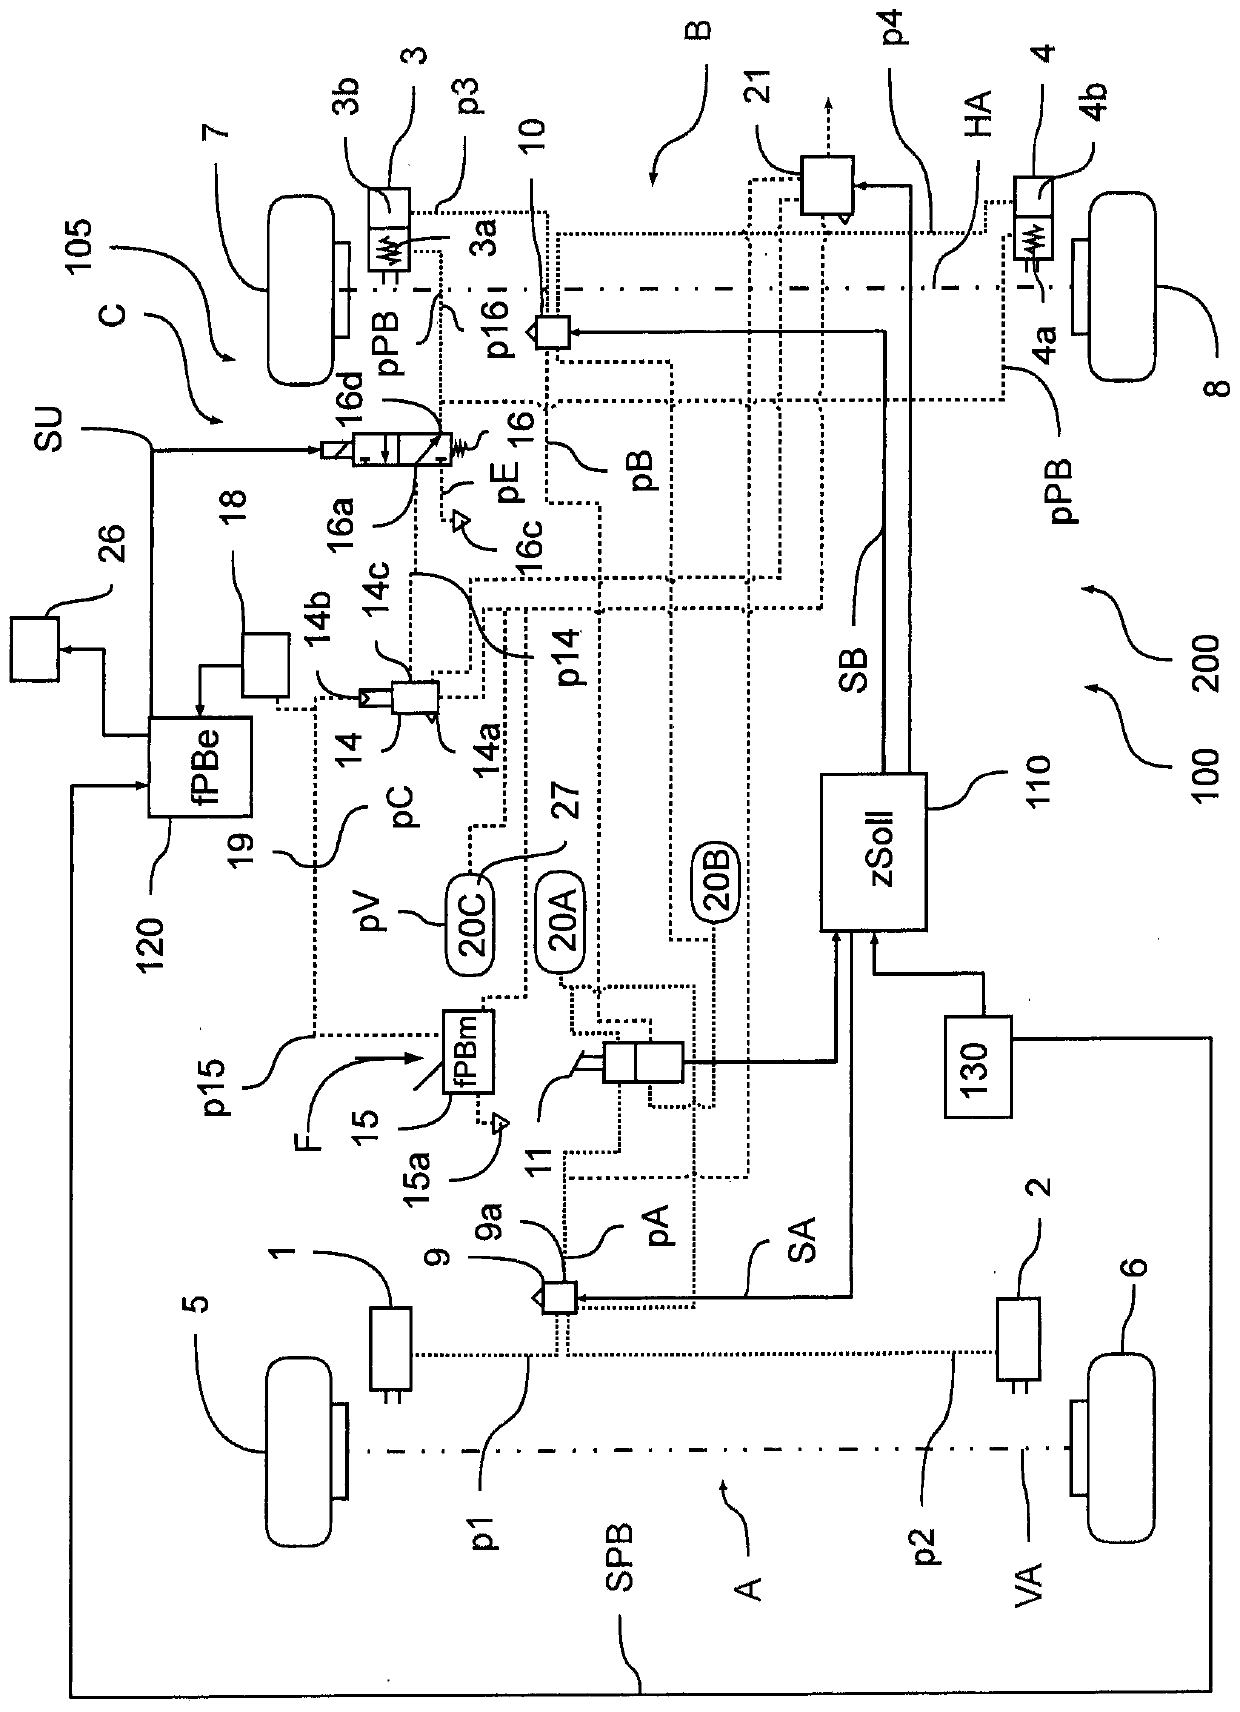 Electronically controllable pneumatic brake system in a utility vehicle and method for electronically controlling a pneumatic brake system in a utility vehicle